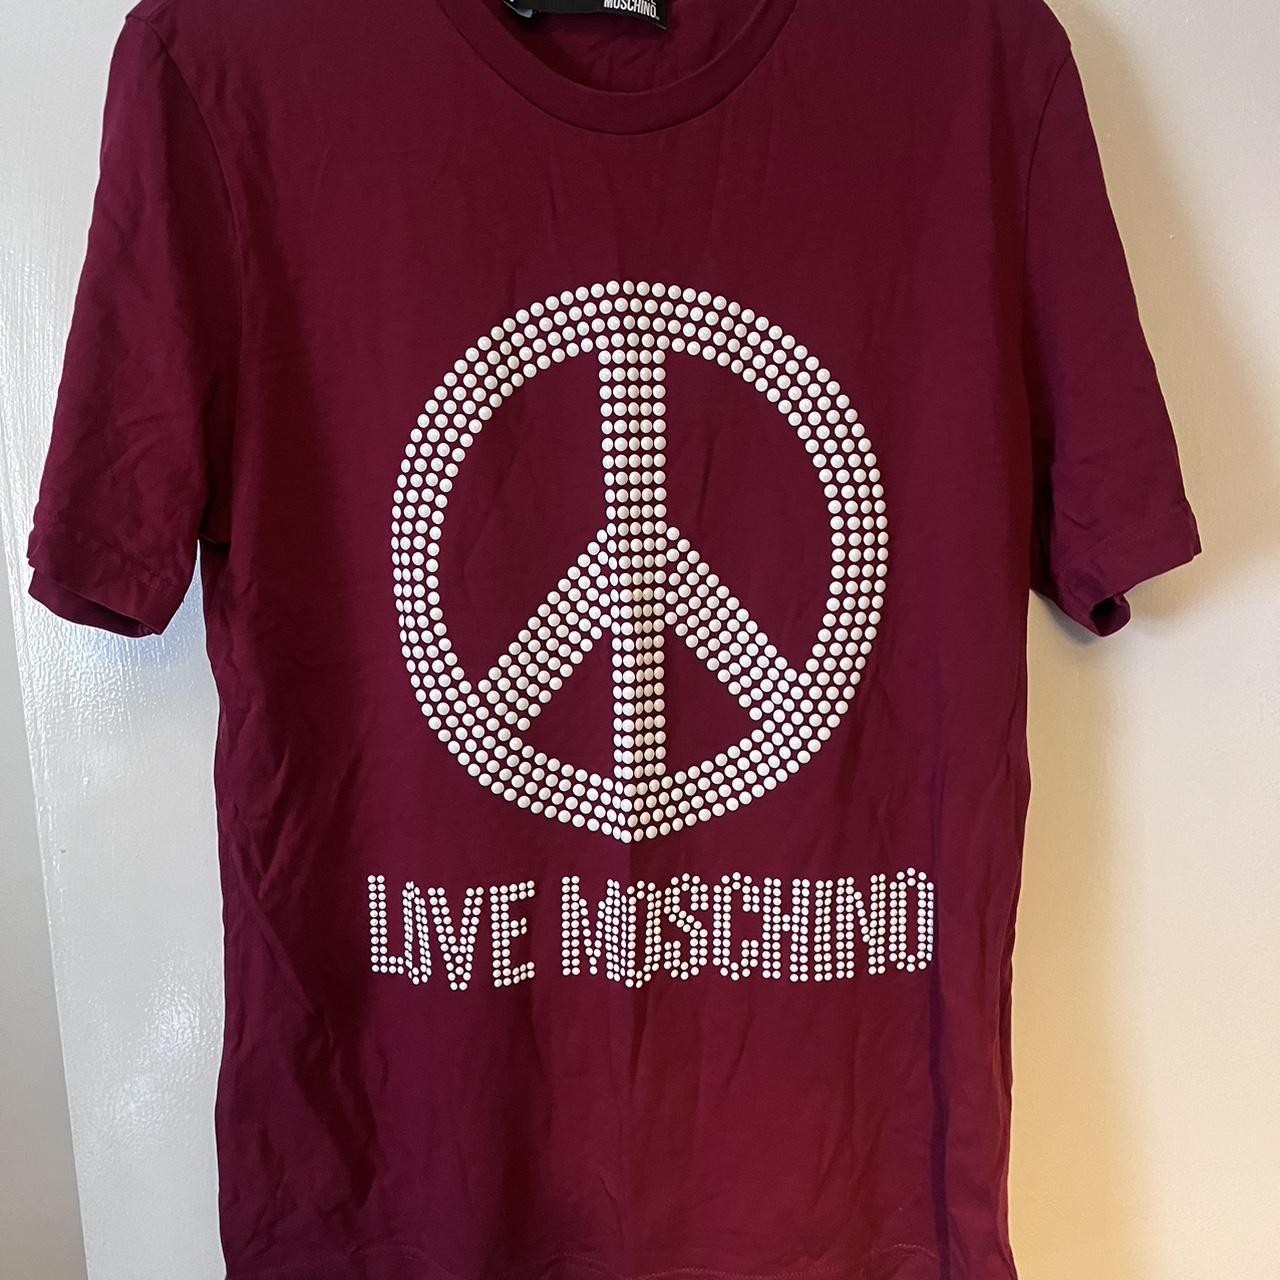 Moschino - Red - T-Shirt - Small - very good condition - Depop